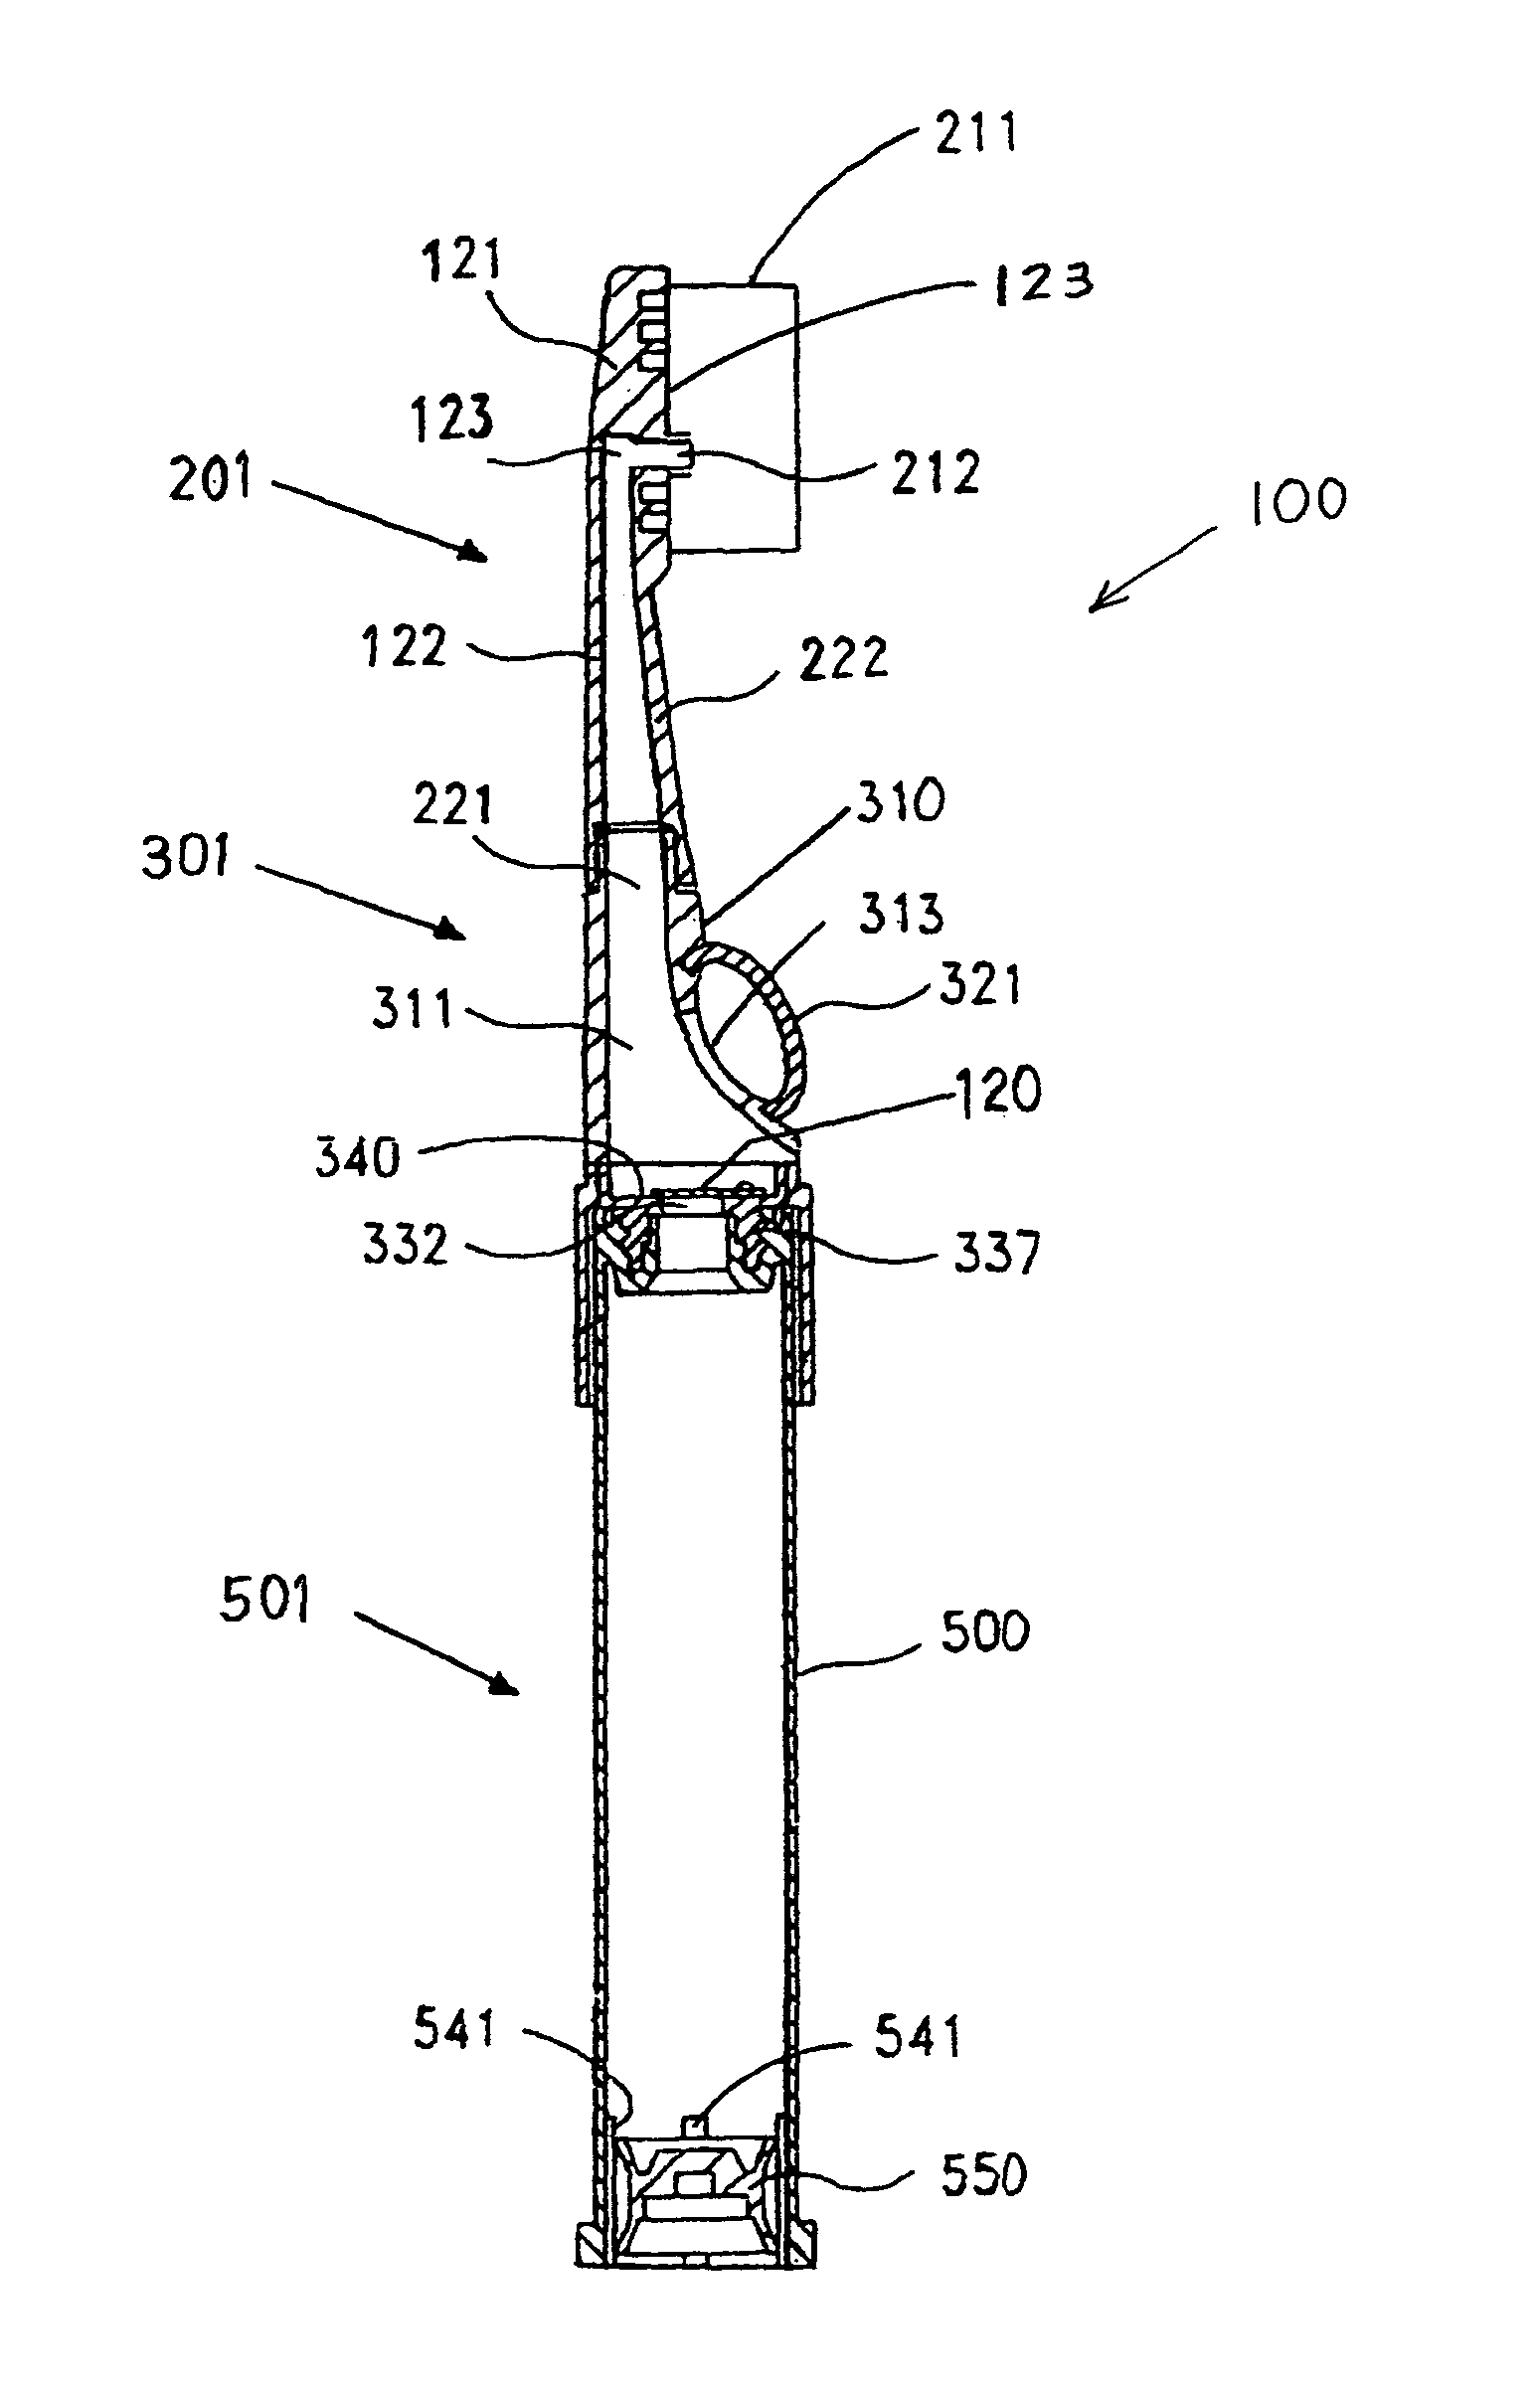 Manual and electrical pump toothbrushes for dispensing liquid and paste dentifrices